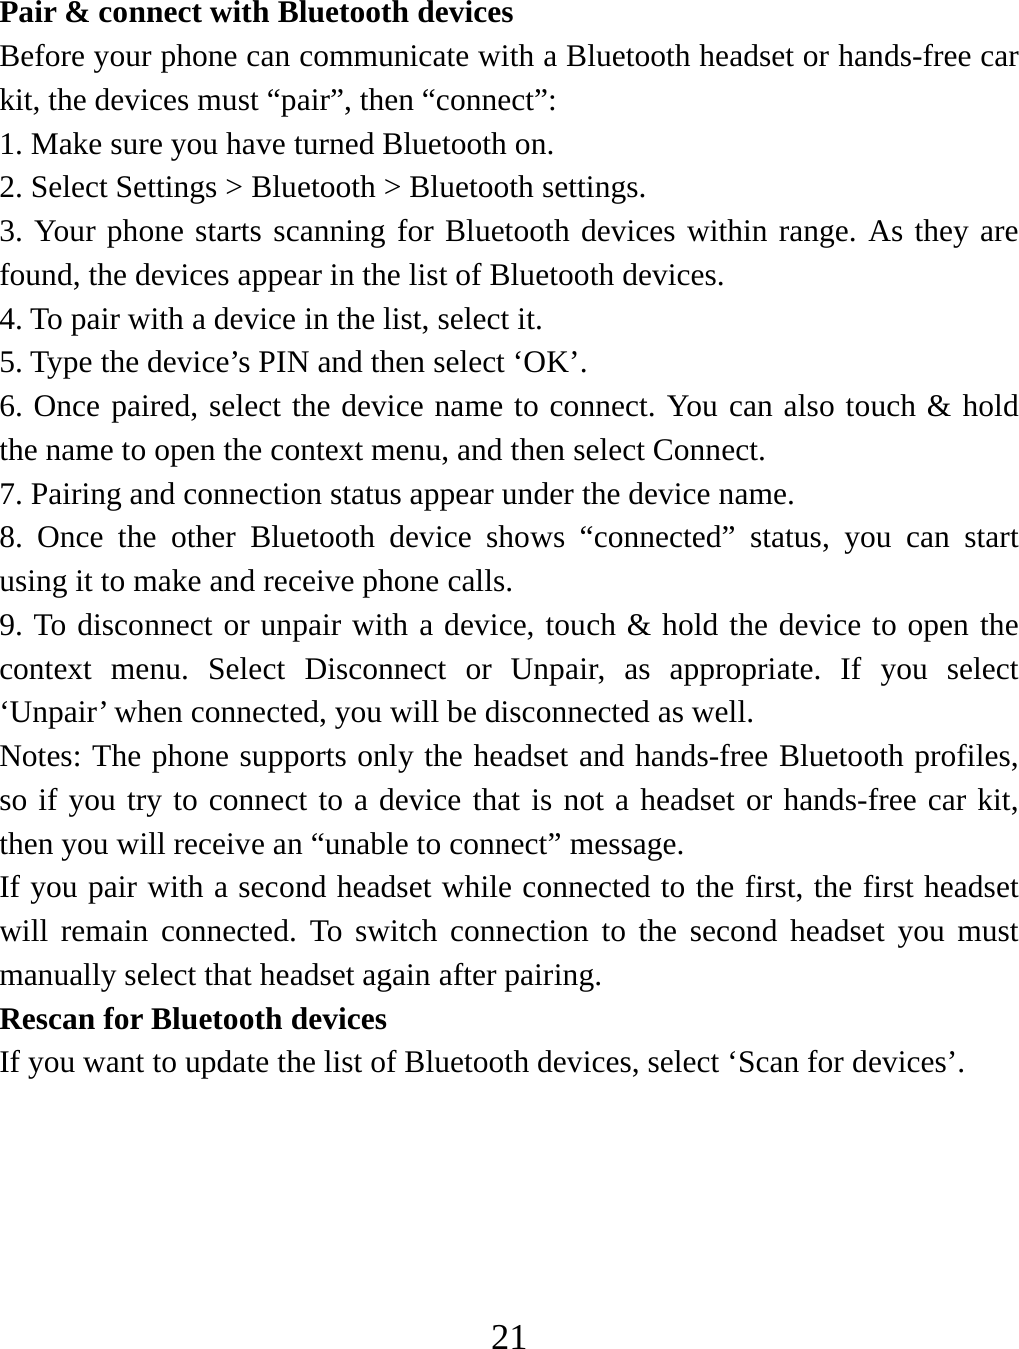   21  Pair &amp; connect with Bluetooth devices   Before your phone can communicate with a Bluetooth headset or hands-free car kit, the devices must “pair”, then “connect”:   1. Make sure you have turned Bluetooth on. 2. Select Settings &gt; Bluetooth &gt; Bluetooth settings.   3. Your phone starts scanning for Bluetooth devices within range. As they are found, the devices appear in the list of Bluetooth devices.   4. To pair with a device in the list, select it.   5. Type the device’s PIN and then select ‘OK’.   6. Once paired, select the device name to connect. You can also touch &amp; hold the name to open the context menu, and then select Connect.   7. Pairing and connection status appear under the device name.   8. Once the other Bluetooth device shows “connected” status, you can start using it to make and receive phone calls.   9. To disconnect or unpair with a device, touch &amp; hold the device to open the context menu. Select Disconnect or Unpair, as appropriate. If you select ‘Unpair’ when connected, you will be disconnected as well.   Notes: The phone supports only the headset and hands-free Bluetooth profiles, so if you try to connect to a device that is not a headset or hands-free car kit, then you will receive an “unable to connect” message.   If you pair with a second headset while connected to the first, the first headset will remain connected. To switch connection to the second headset you must manually select that headset again after pairing.   Rescan for Bluetooth devices   If you want to update the list of Bluetooth devices, select ‘Scan for devices’.        